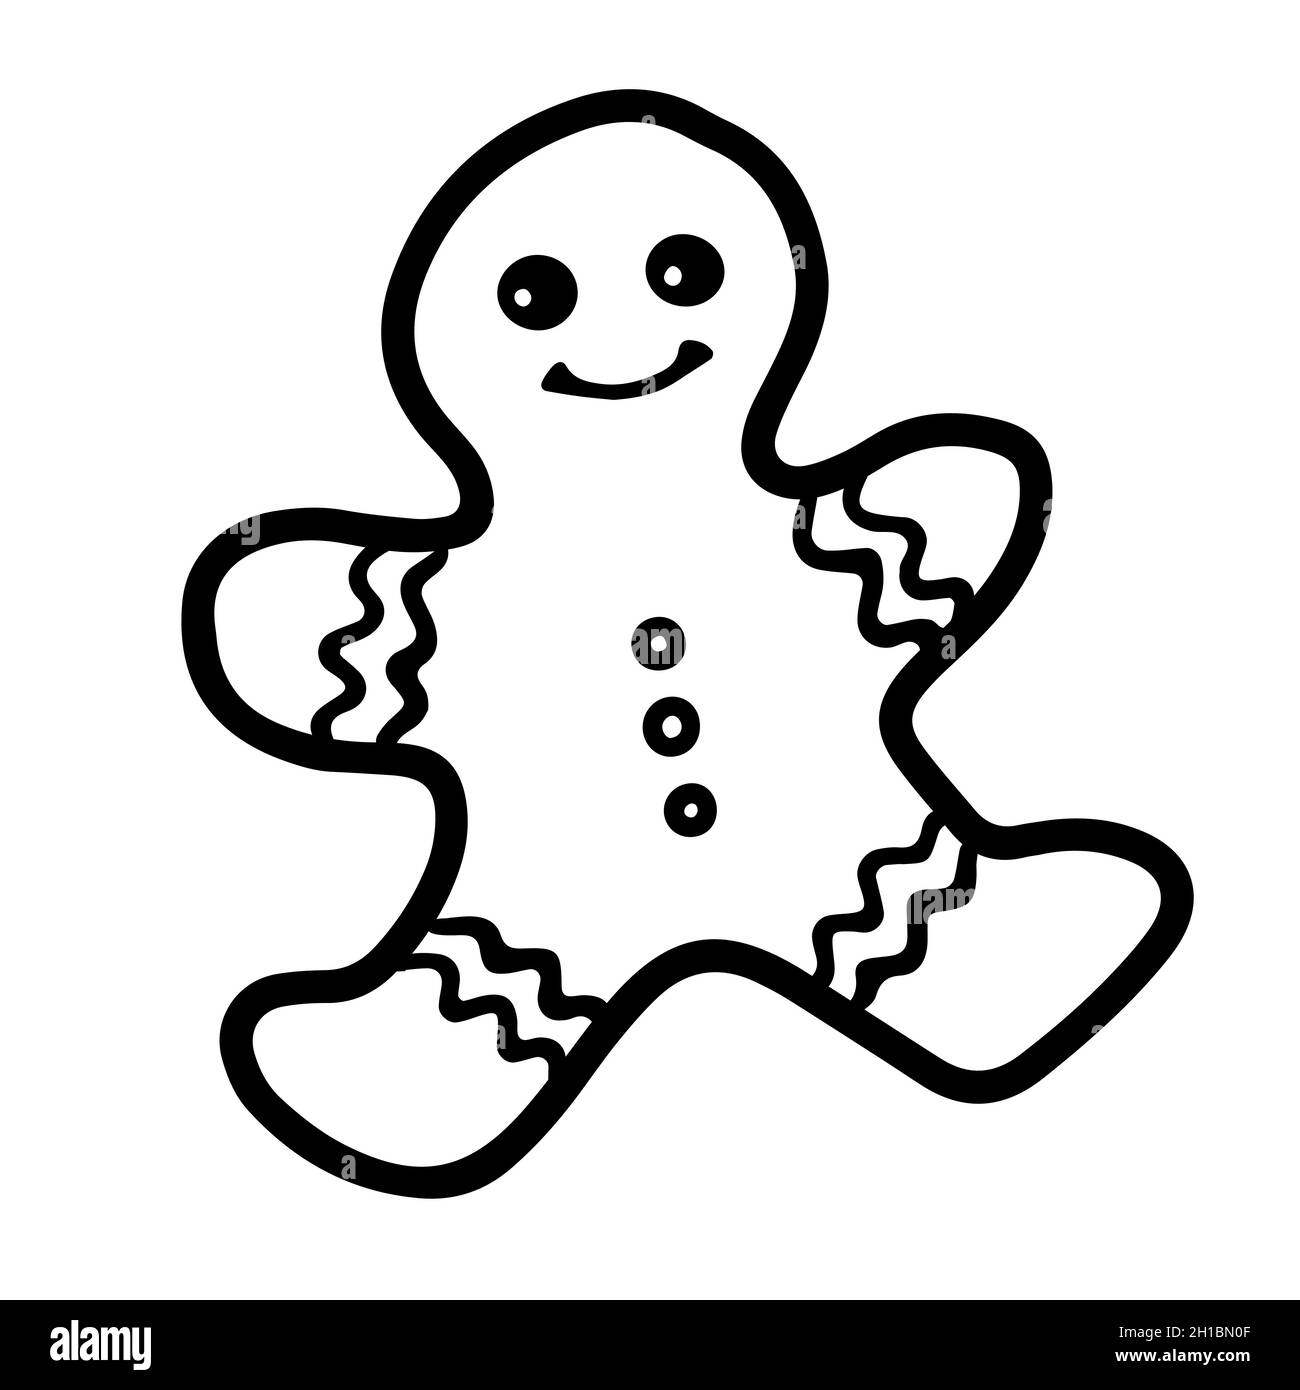 Sweet Cute Christmas cookies gingerbread man with a smile Stock Vector